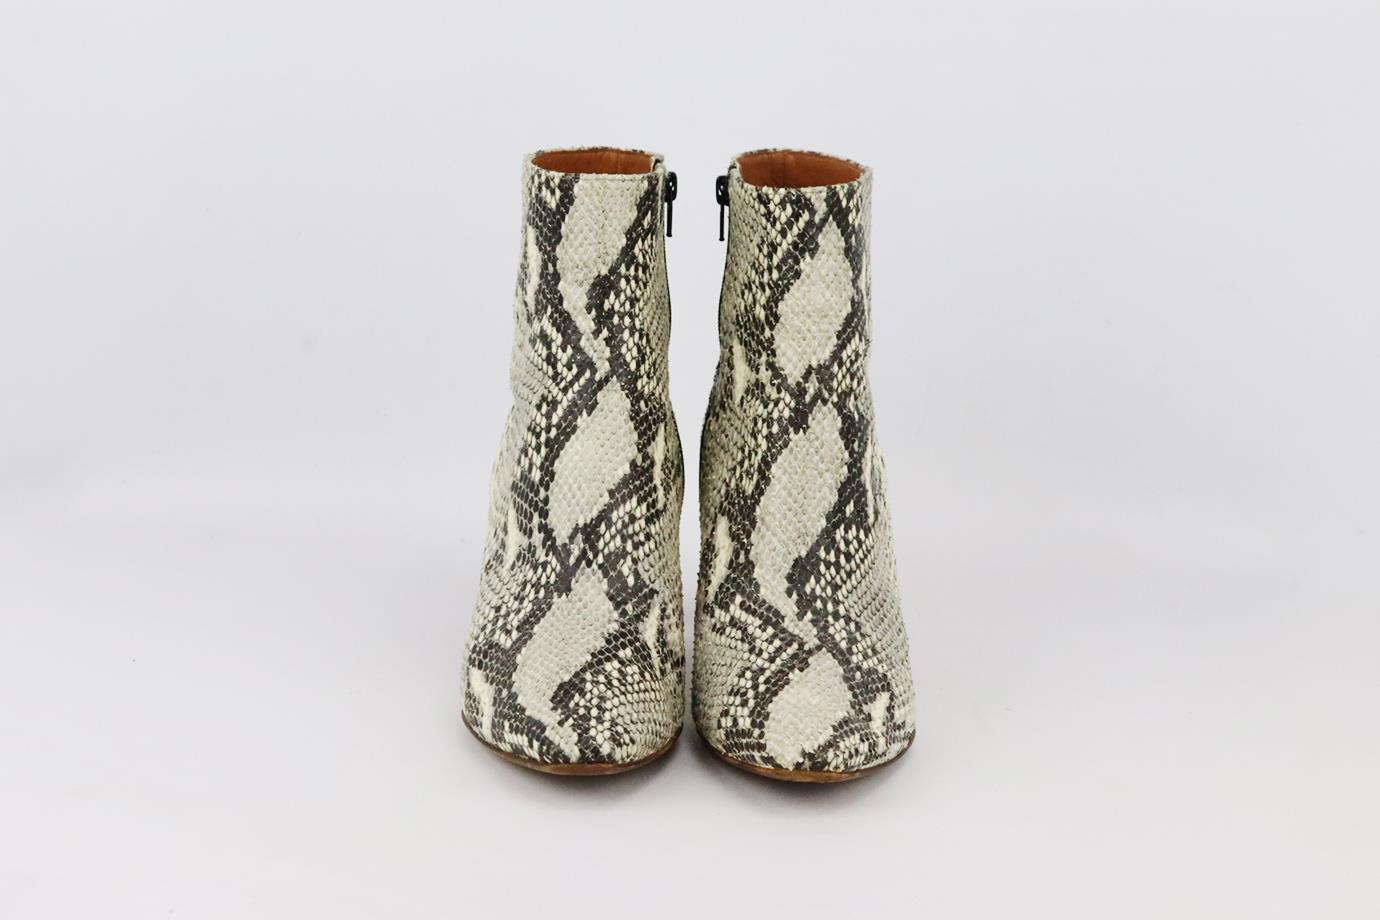 Vetements snakeskin and leather ankle boots. Made from grey, cram and black snakeskin with bright orange heel and pointed toe. Grey, cream and black. Zip fastening at side. Does not come with box or dustbag. Size: EU 39 (UK 6, US 9). Insole: 9.9 in.